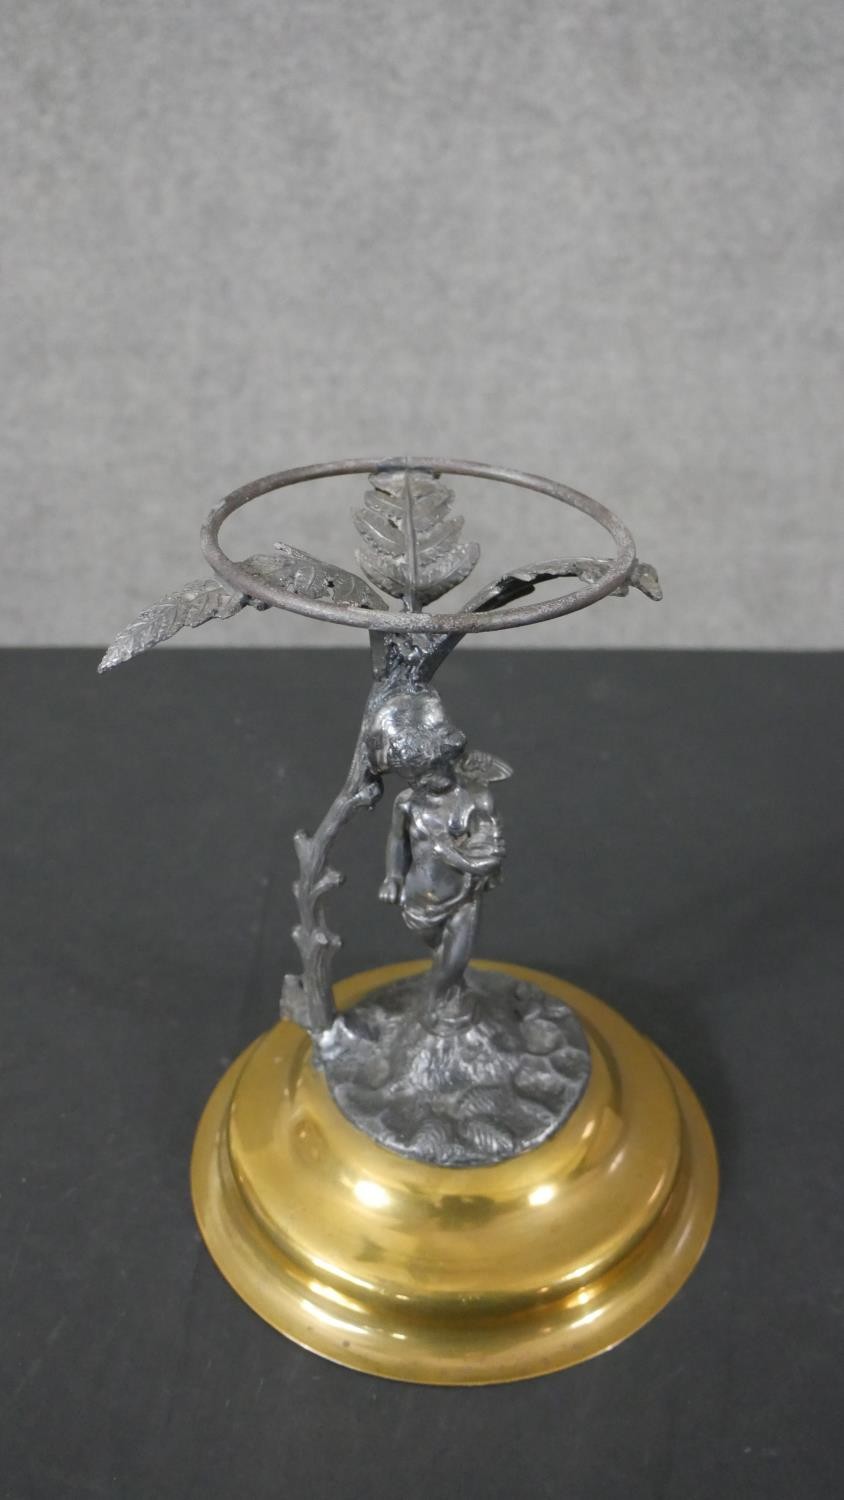 A Victorian Australian design brass an silver plated stand modelled in the figure of a cherub with a